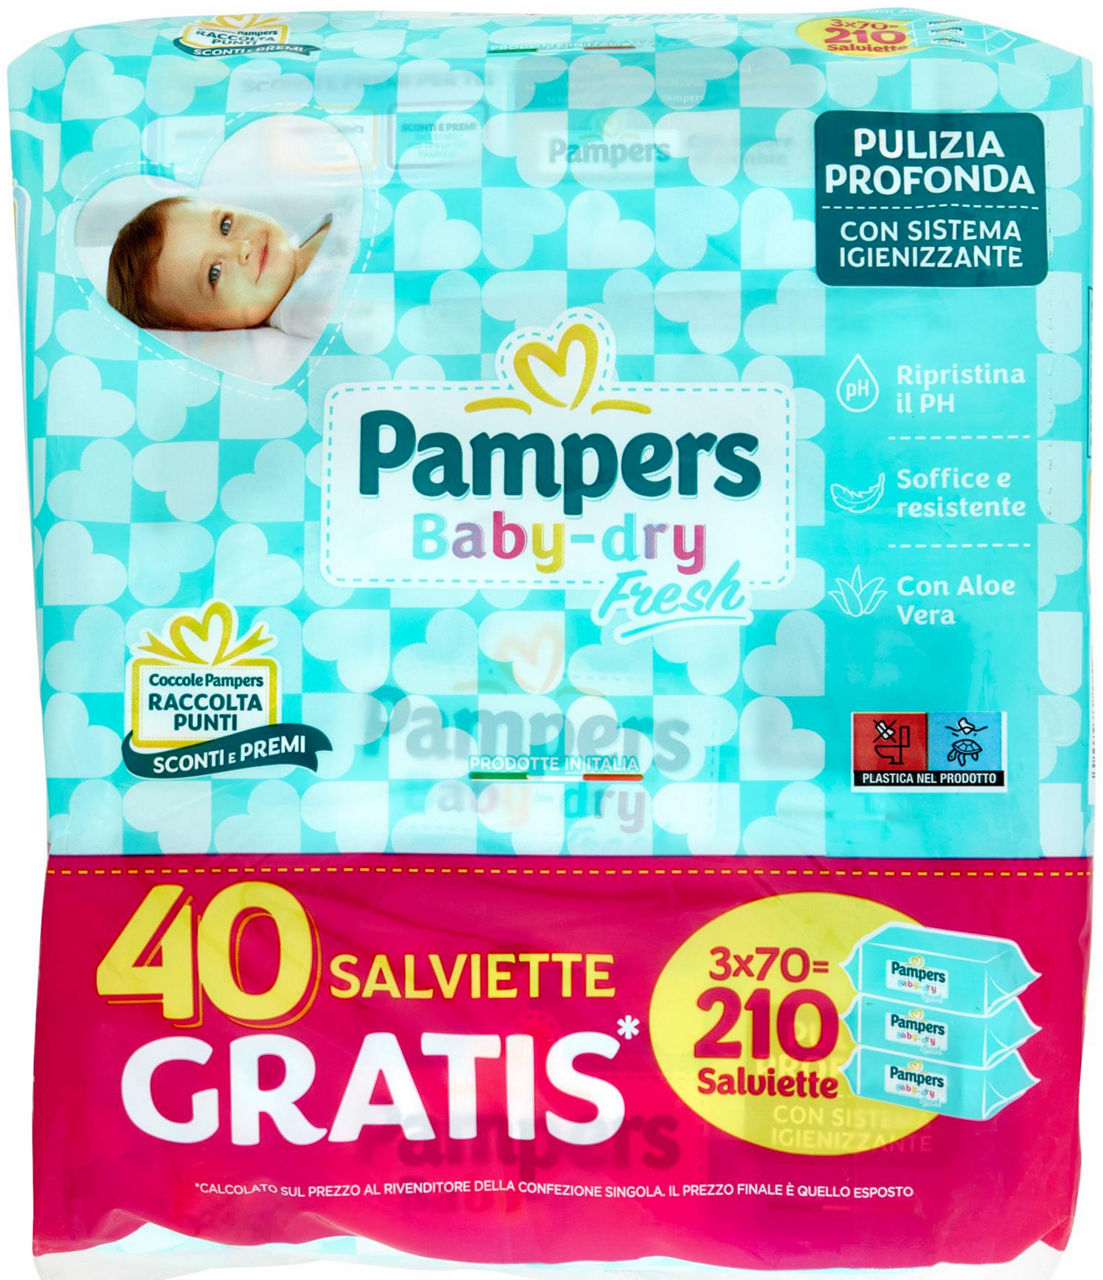 Salviette baby pampers baby dry pz 170+40 gratis o/s